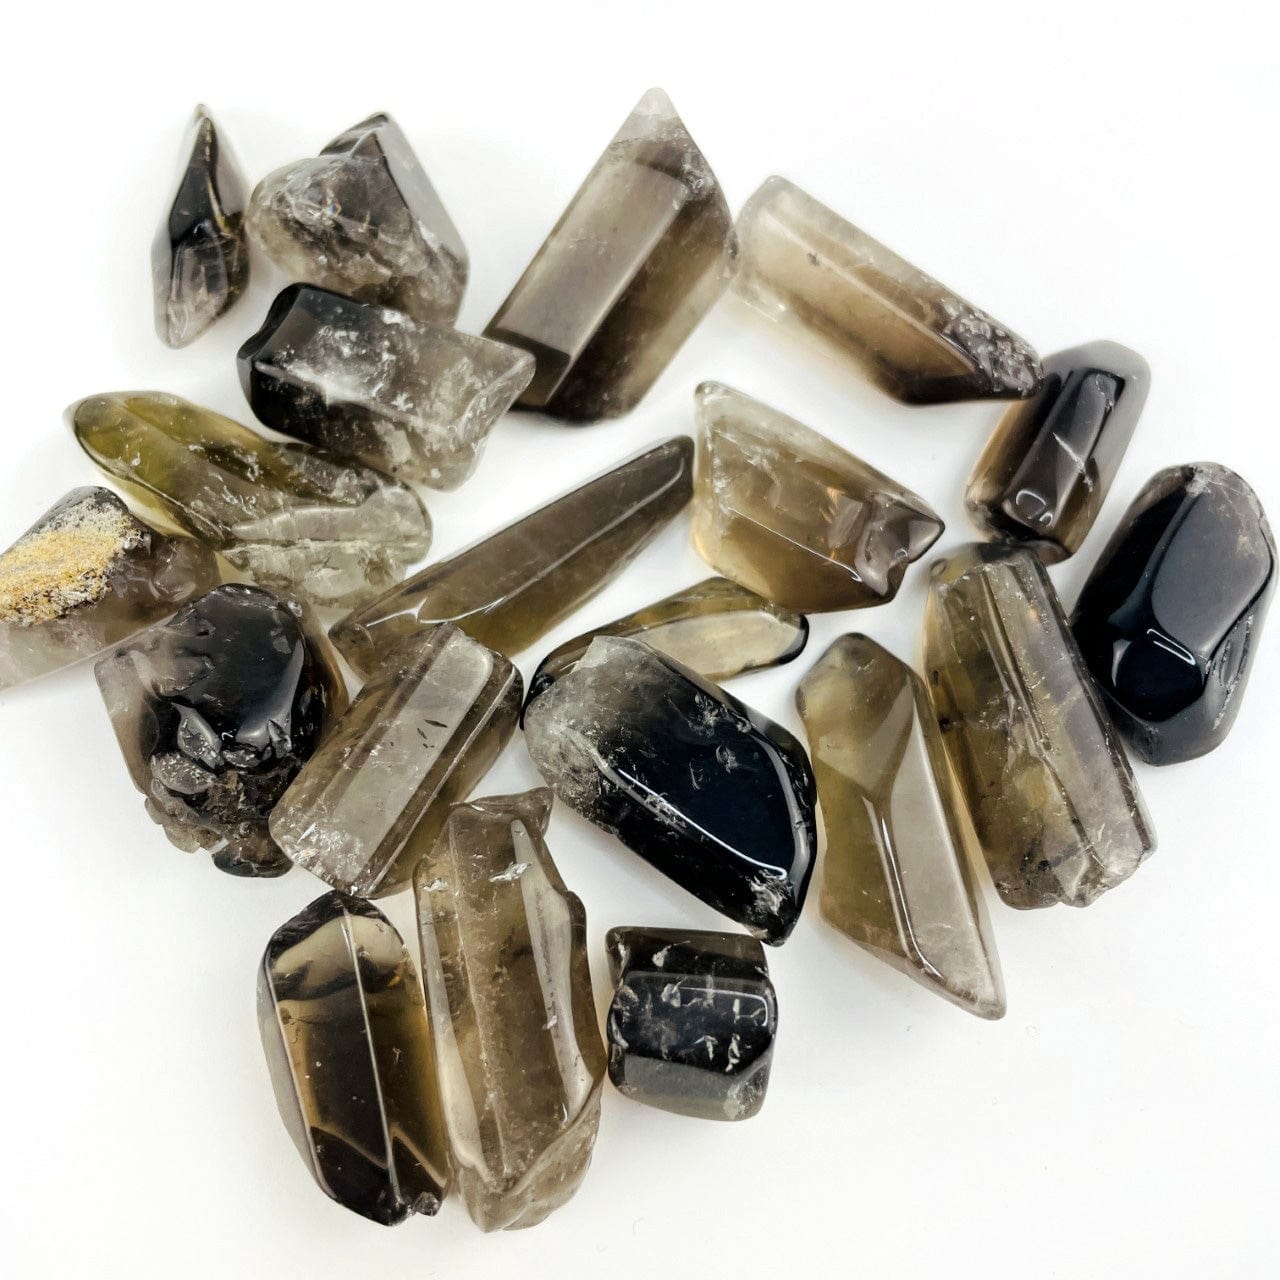 Polished Smoky Quartz Tumbled Stones and Points on a table showing variations